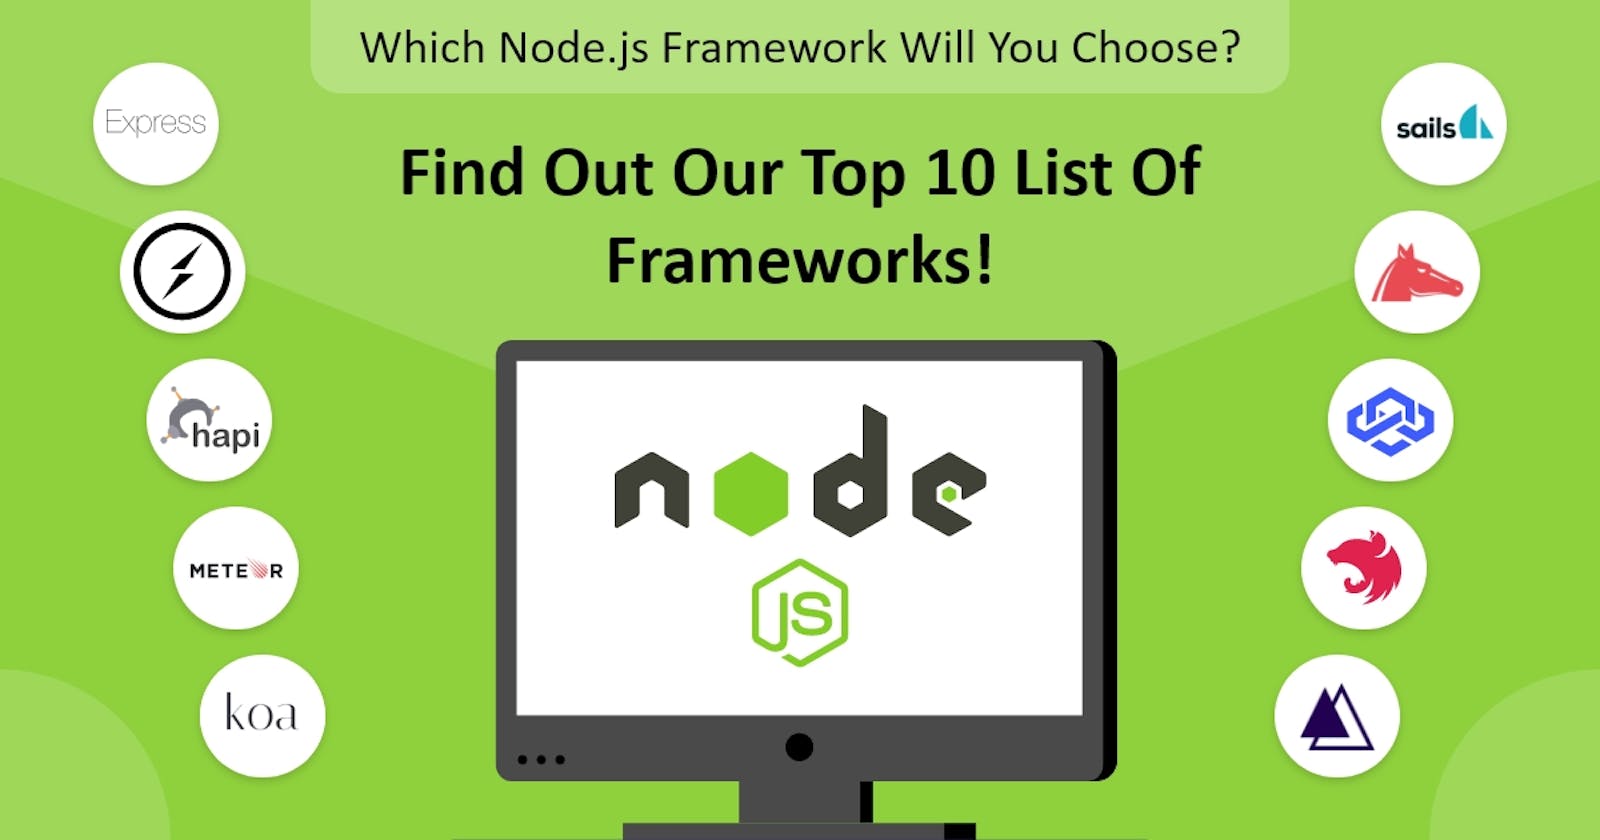 What are the Top 10 NodeJS Frameworks?